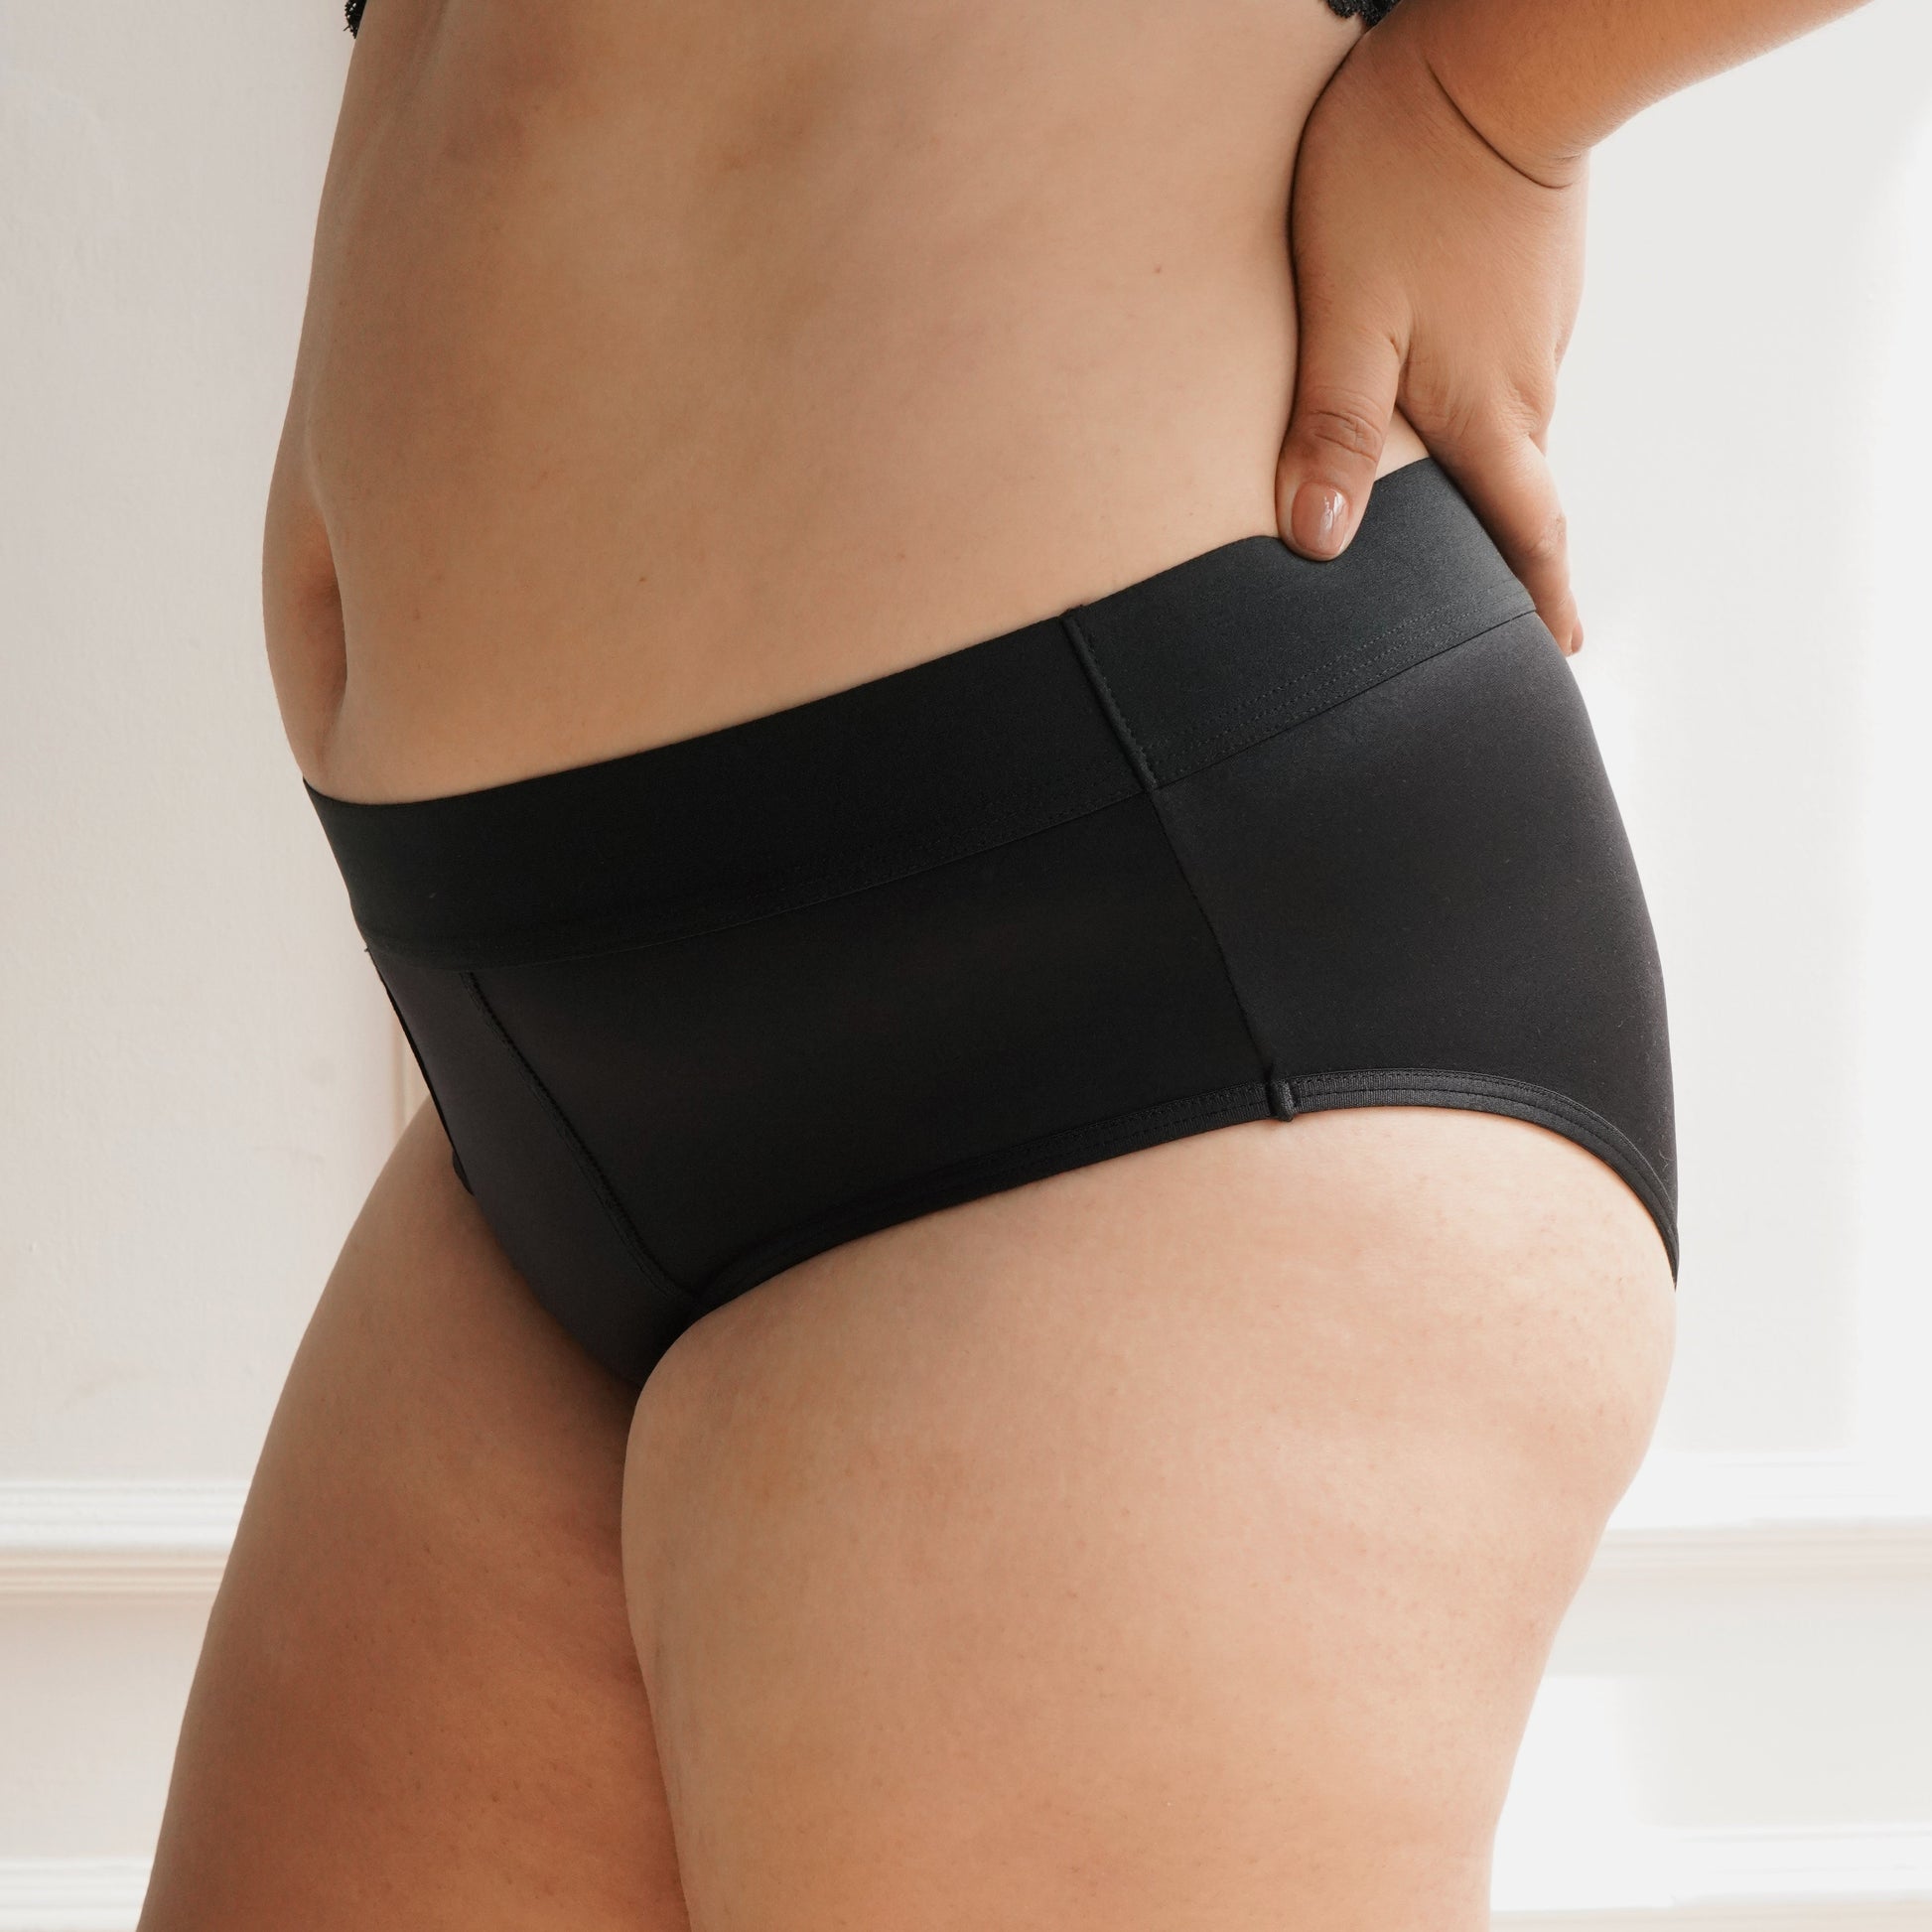 Black Plus Size Modal Panties For Women, High Waist Thin And